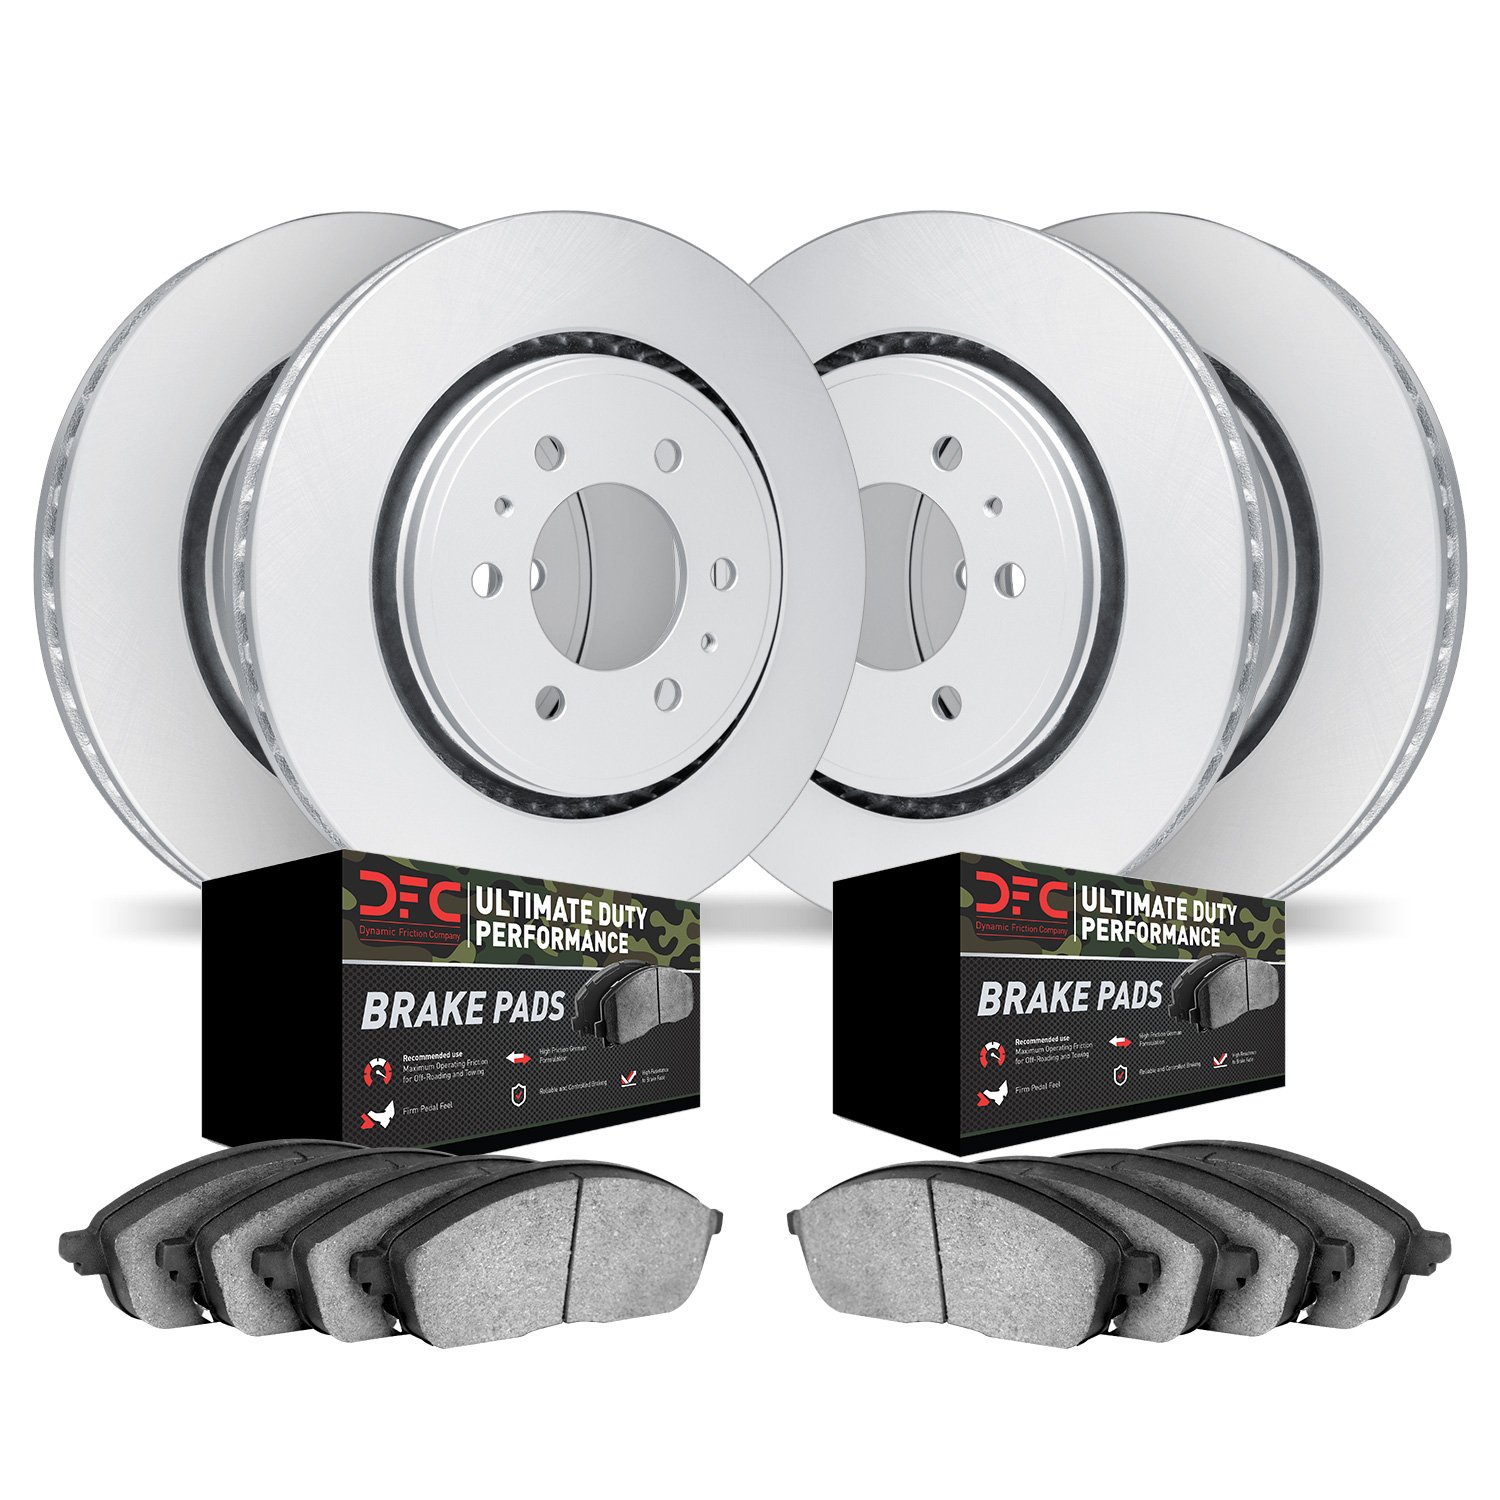 4404-76005 Geospec Brake Rotors with Ultimate-Duty Brake Pads Kit, 2010-2014 Lexus/Toyota/Scion, Position: Front and Rear